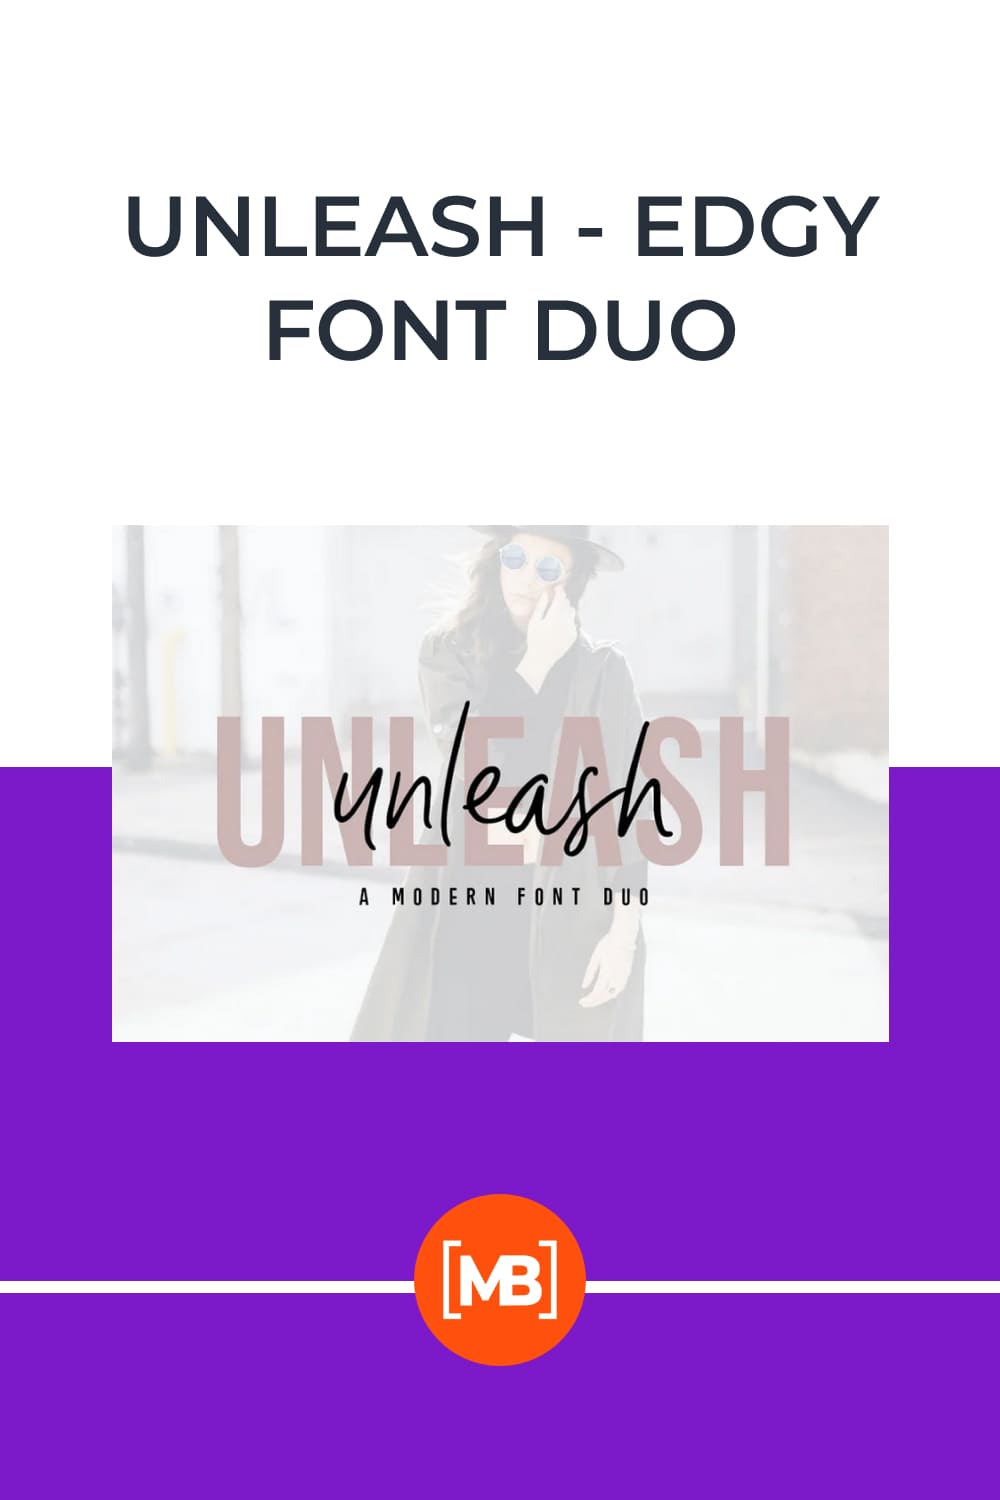 Urban font with cute style.